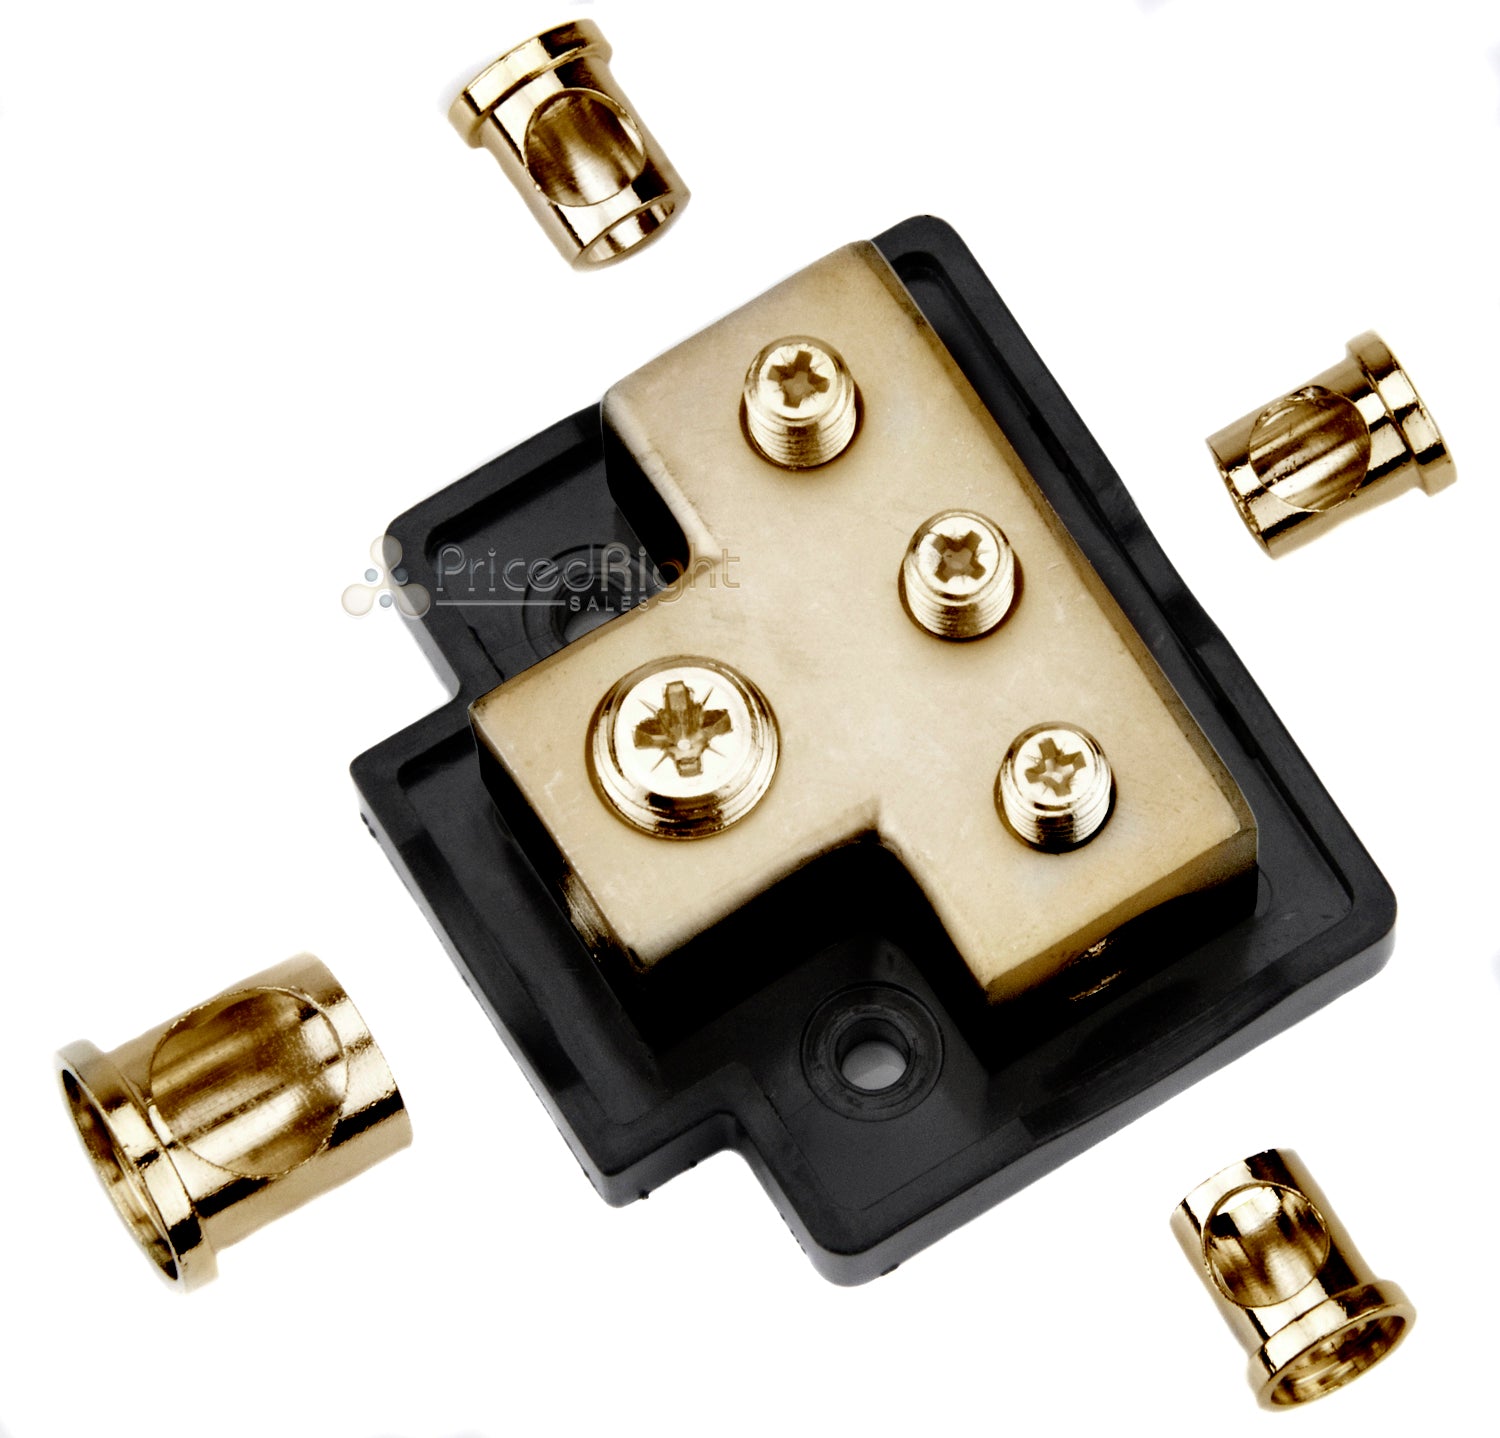 Xscorpion 0/4 Gauge Gold Terminal T Distribution Block With Adapters TB0444G